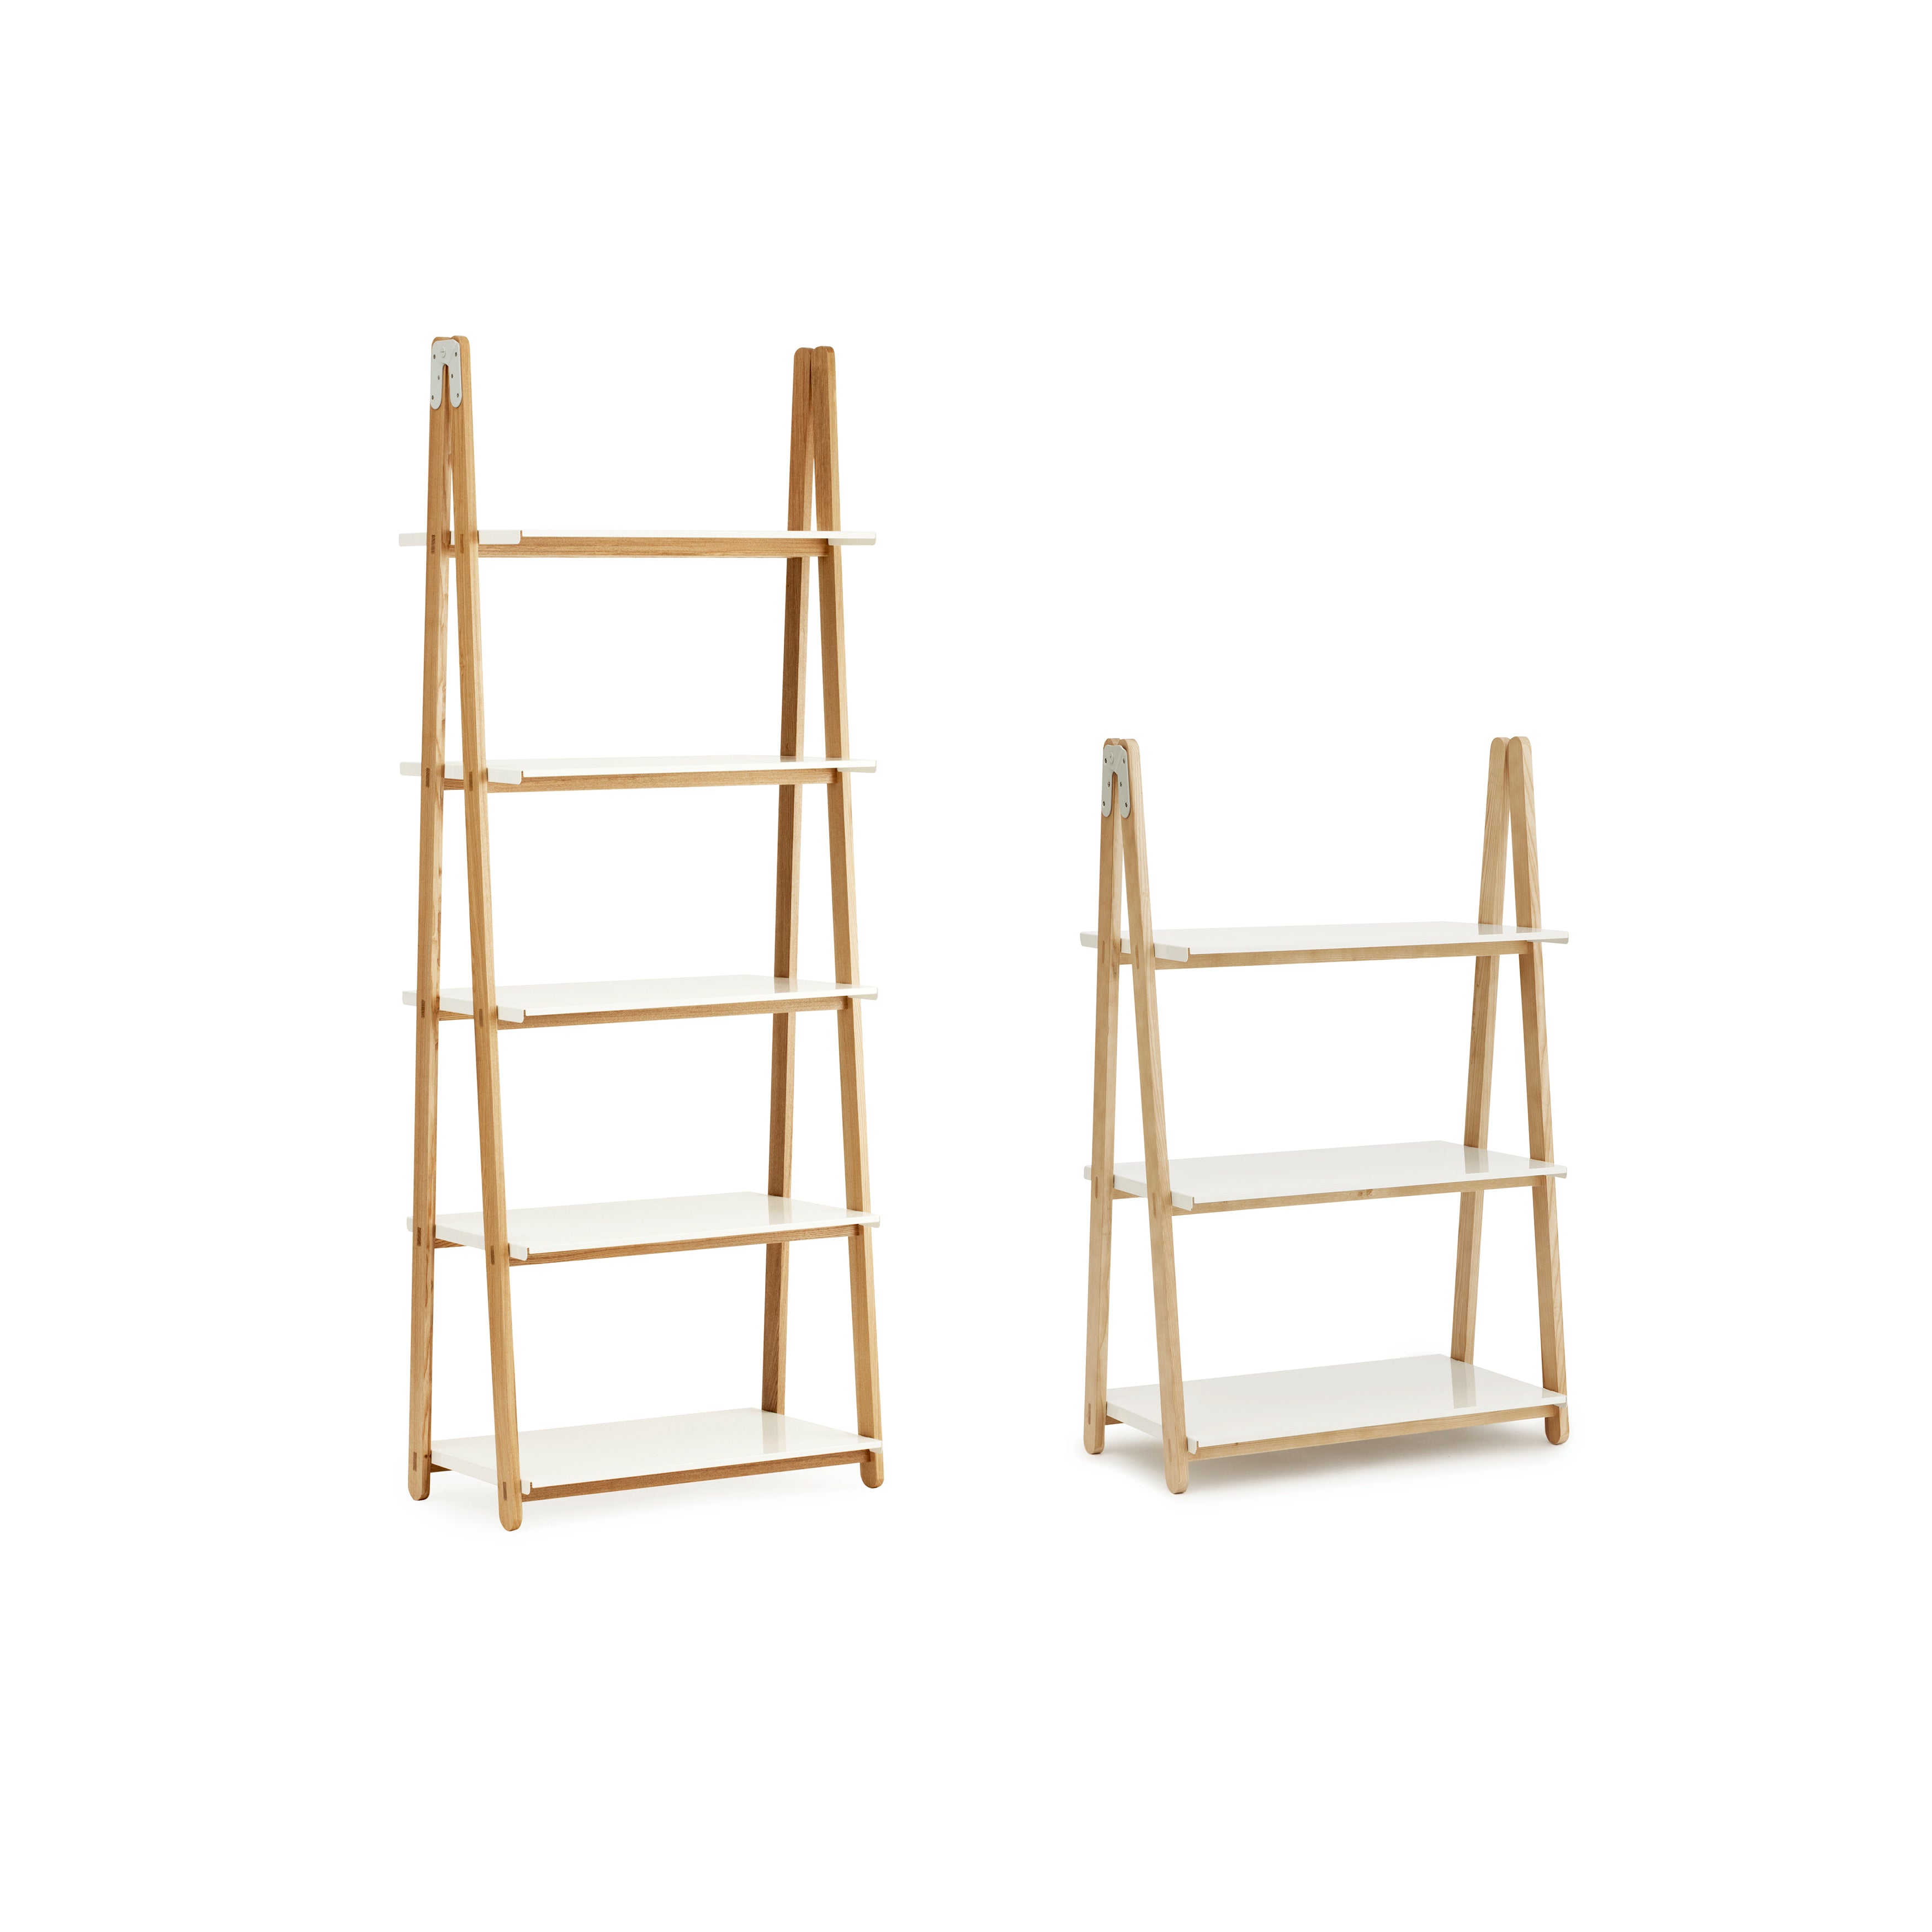 One Step Up Bookcase: High + Low